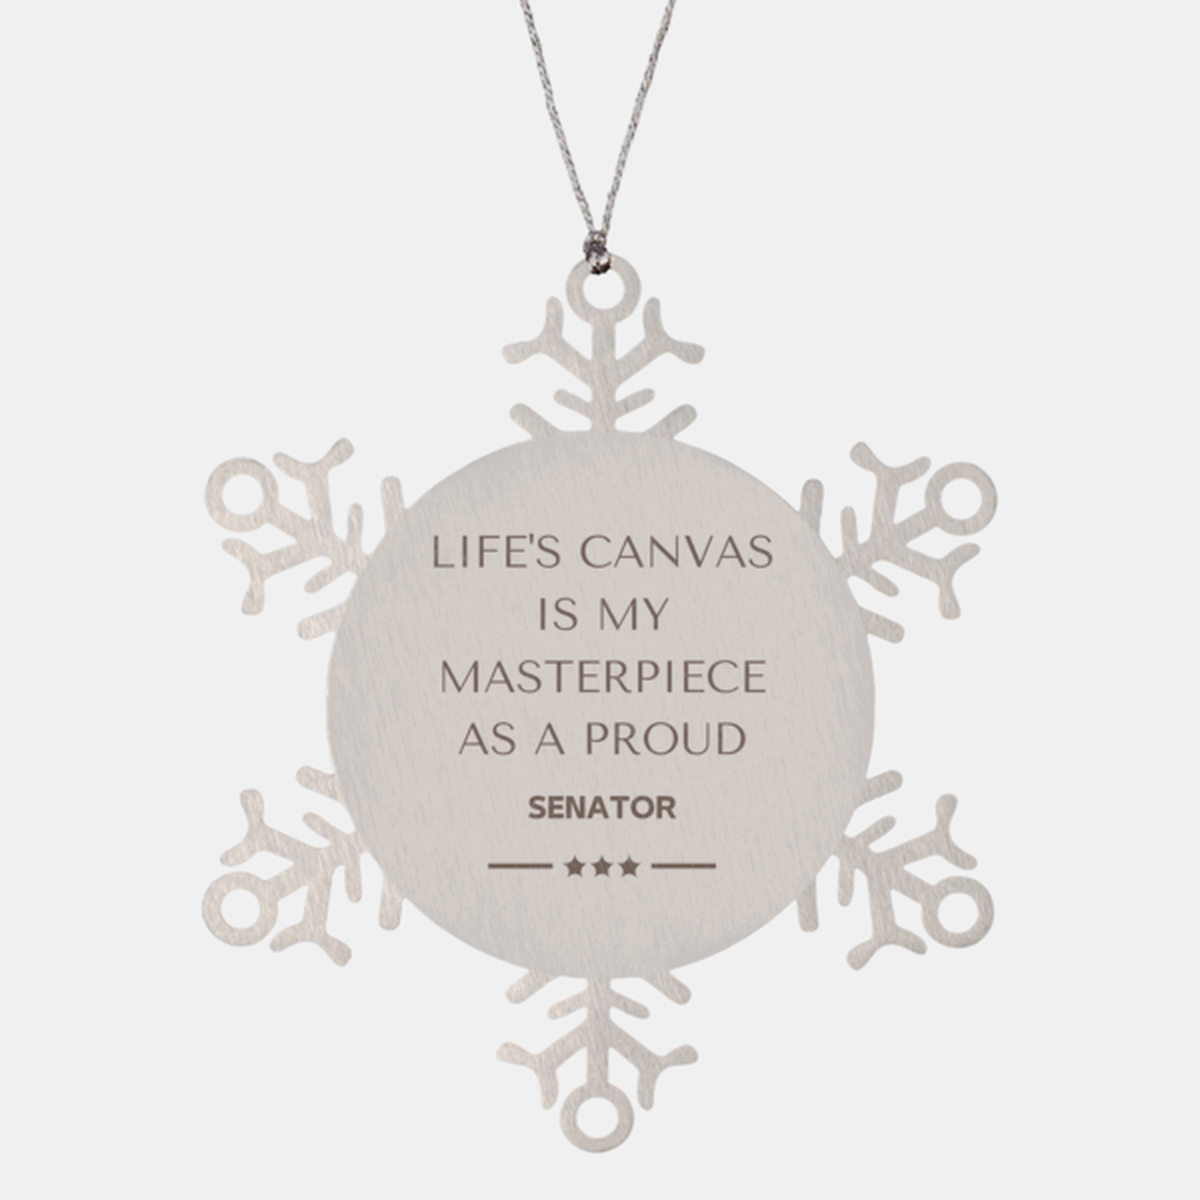 Proud Senator Gifts, Life's canvas is my masterpiece, Epic Birthday Christmas Unique Snowflake Ornament For Senator, Coworkers, Men, Women, Friends